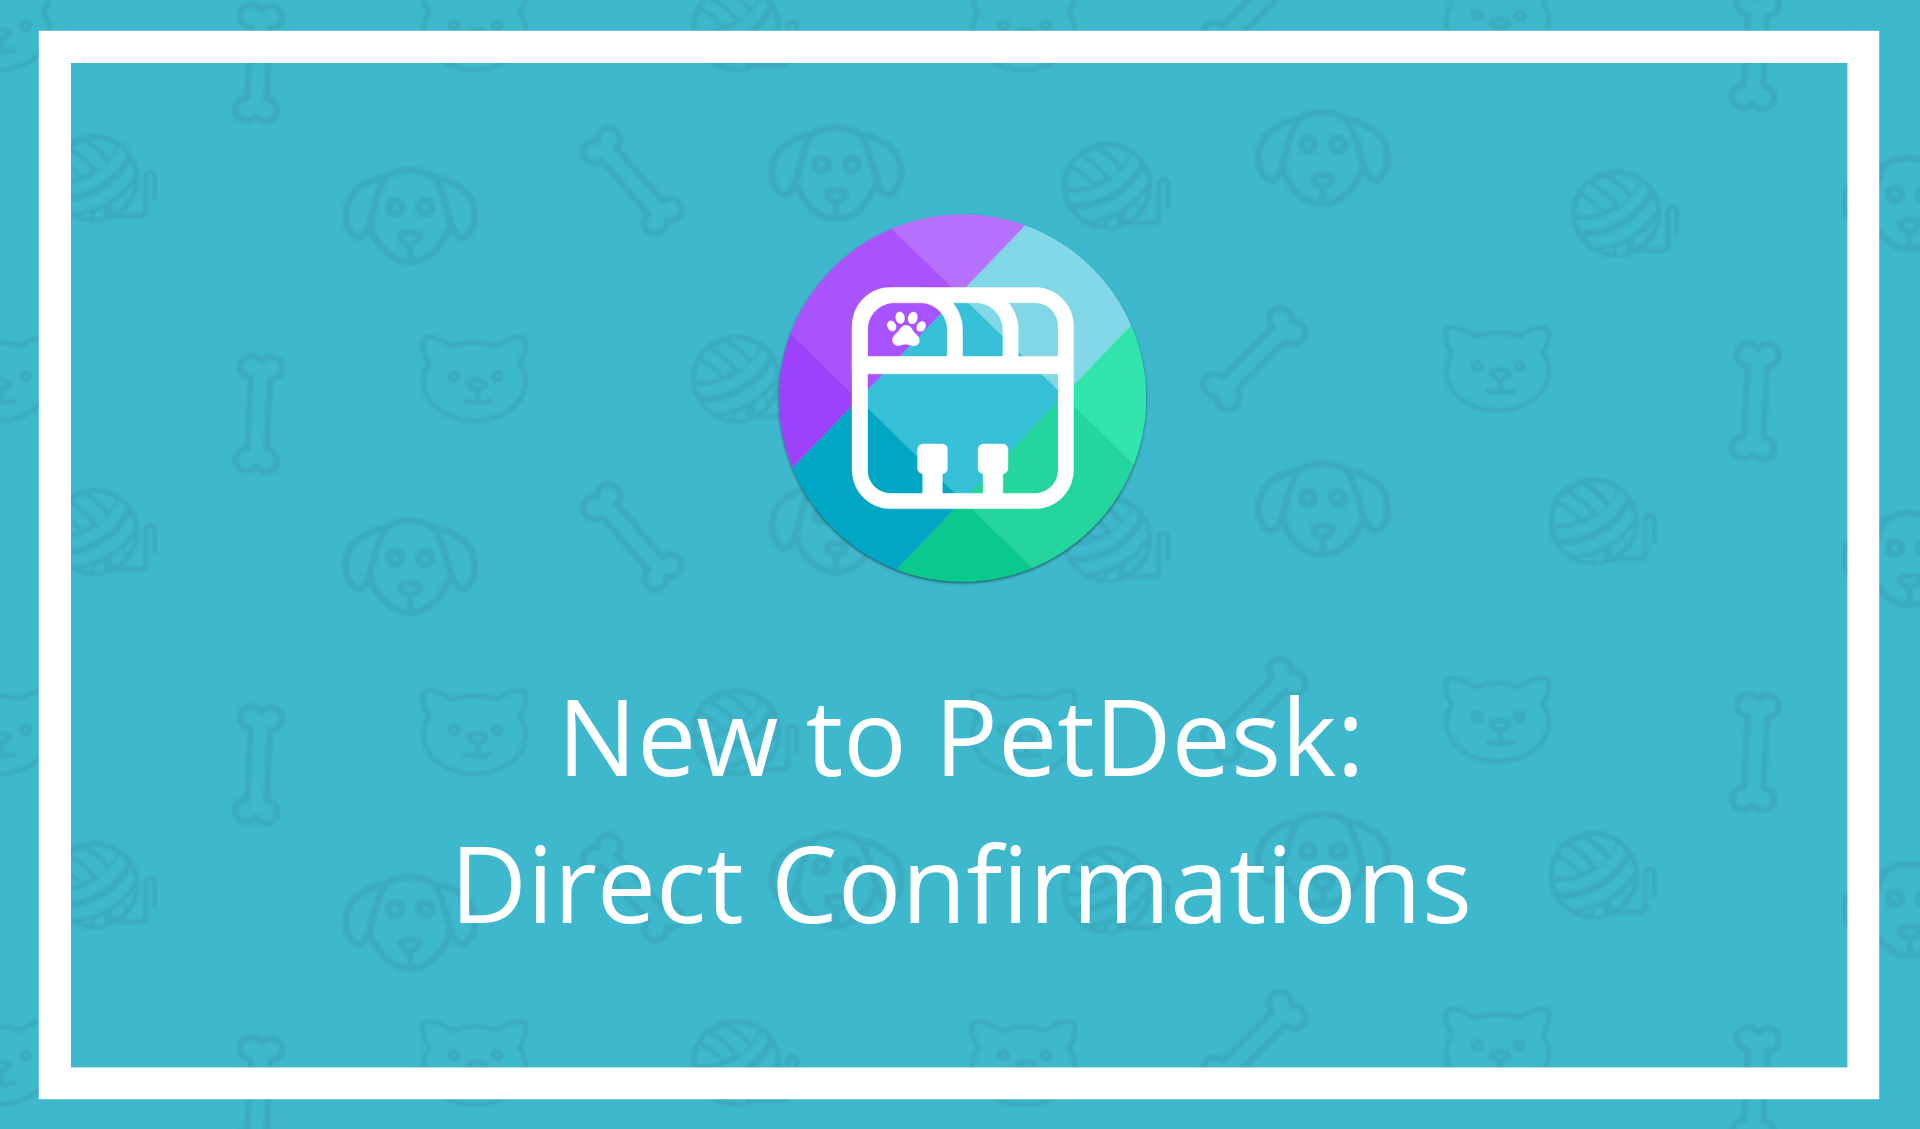 New to PetDesk: Direct Confirmations